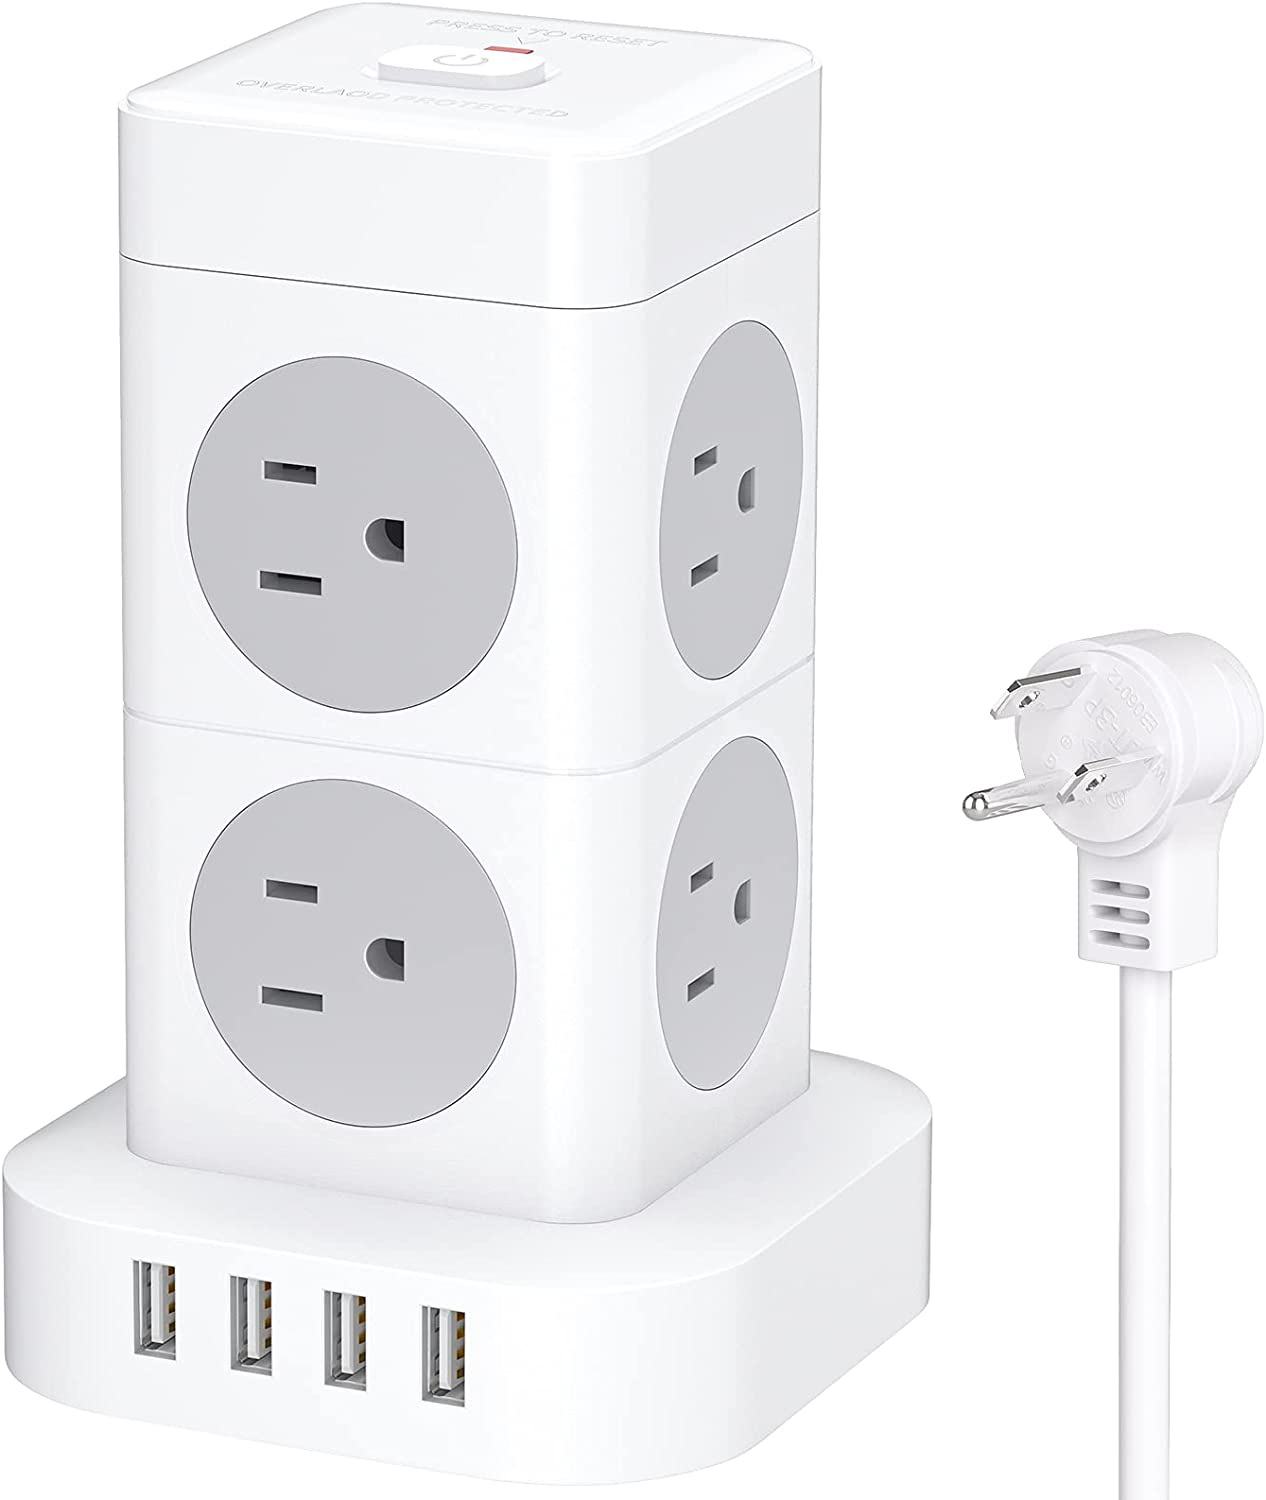 Hulker Tower Power Strip with USB 8 Way 4 USB Ports Flat Plug Extension Cord 6.5FT Vertical Extension Lead with 8 Widely Spaced Outlets Overload Protection 1625W 13A White for Home Office Dorm Animals & Pet Supplies > Pet Supplies > Dog Supplies > Dog Treadmills Hulker   